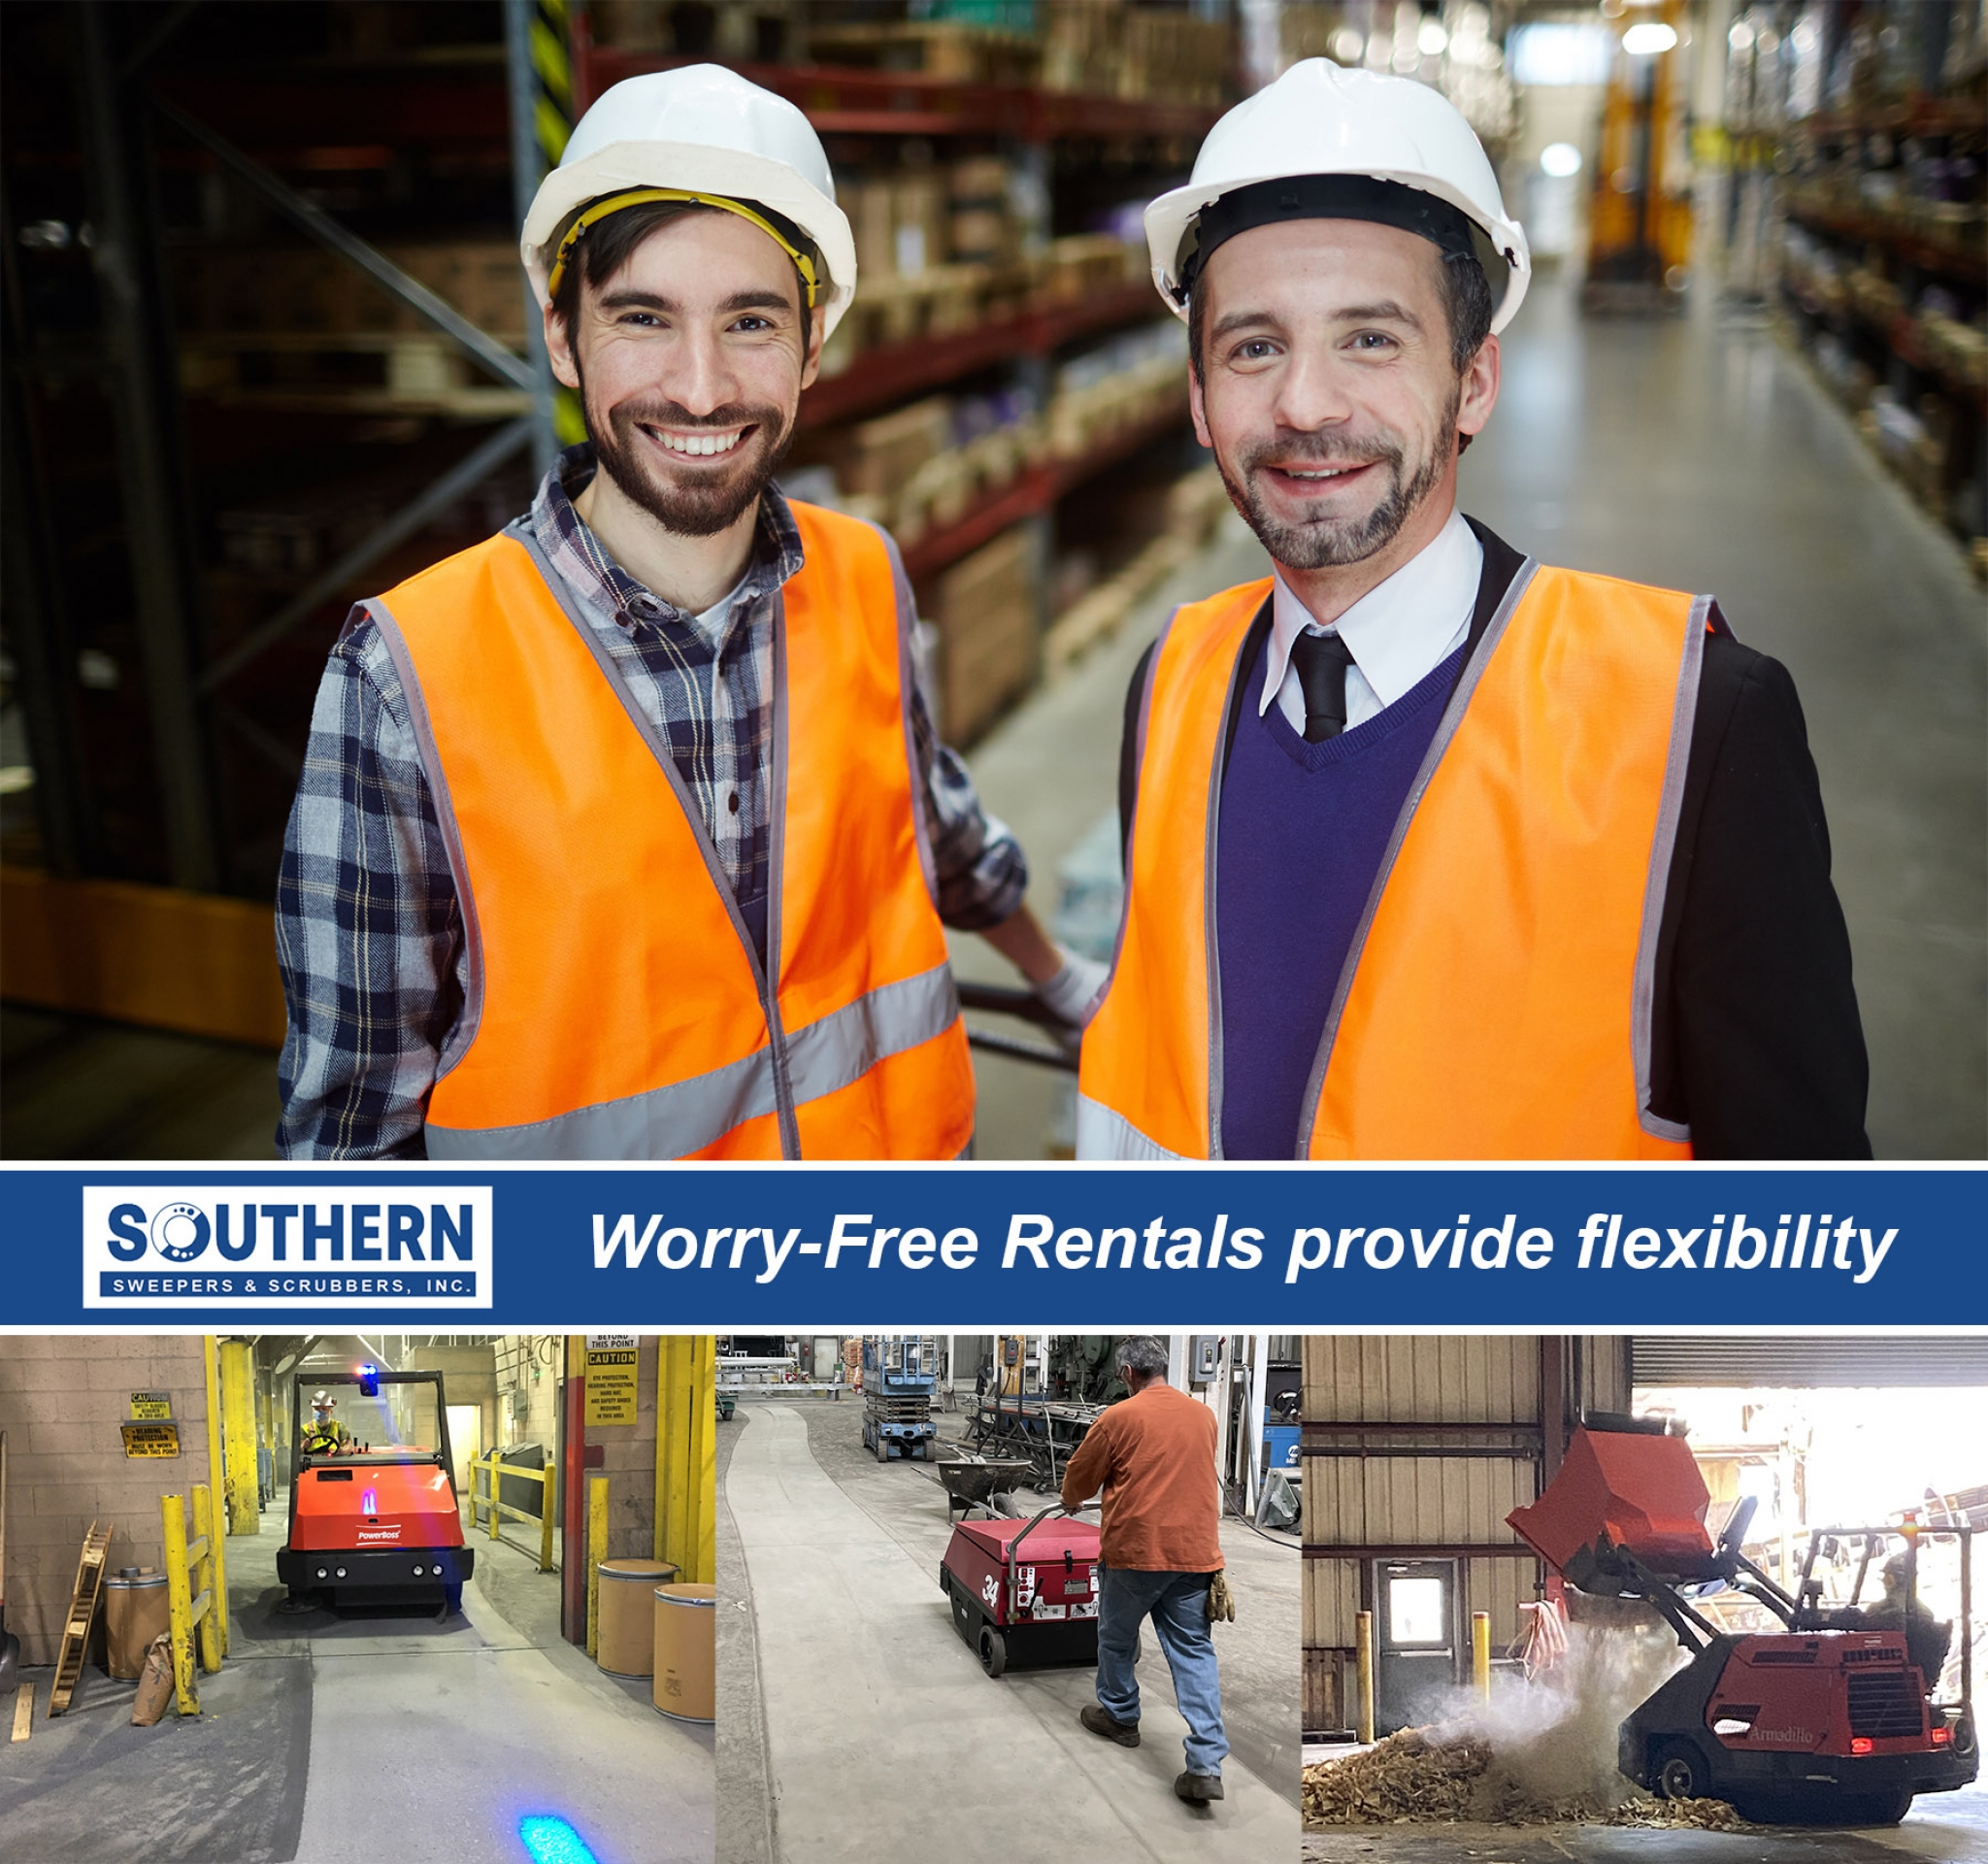 With our Worry Free Rental Program, you won’t have to worry about absorbing maintenance costs. We provide experienced, factory-trained technicians to service all major floor scrubber and sweeper machines to save you time and money. We also offer a maintenance plan that allows our technicians to catch minor issues before they become major.